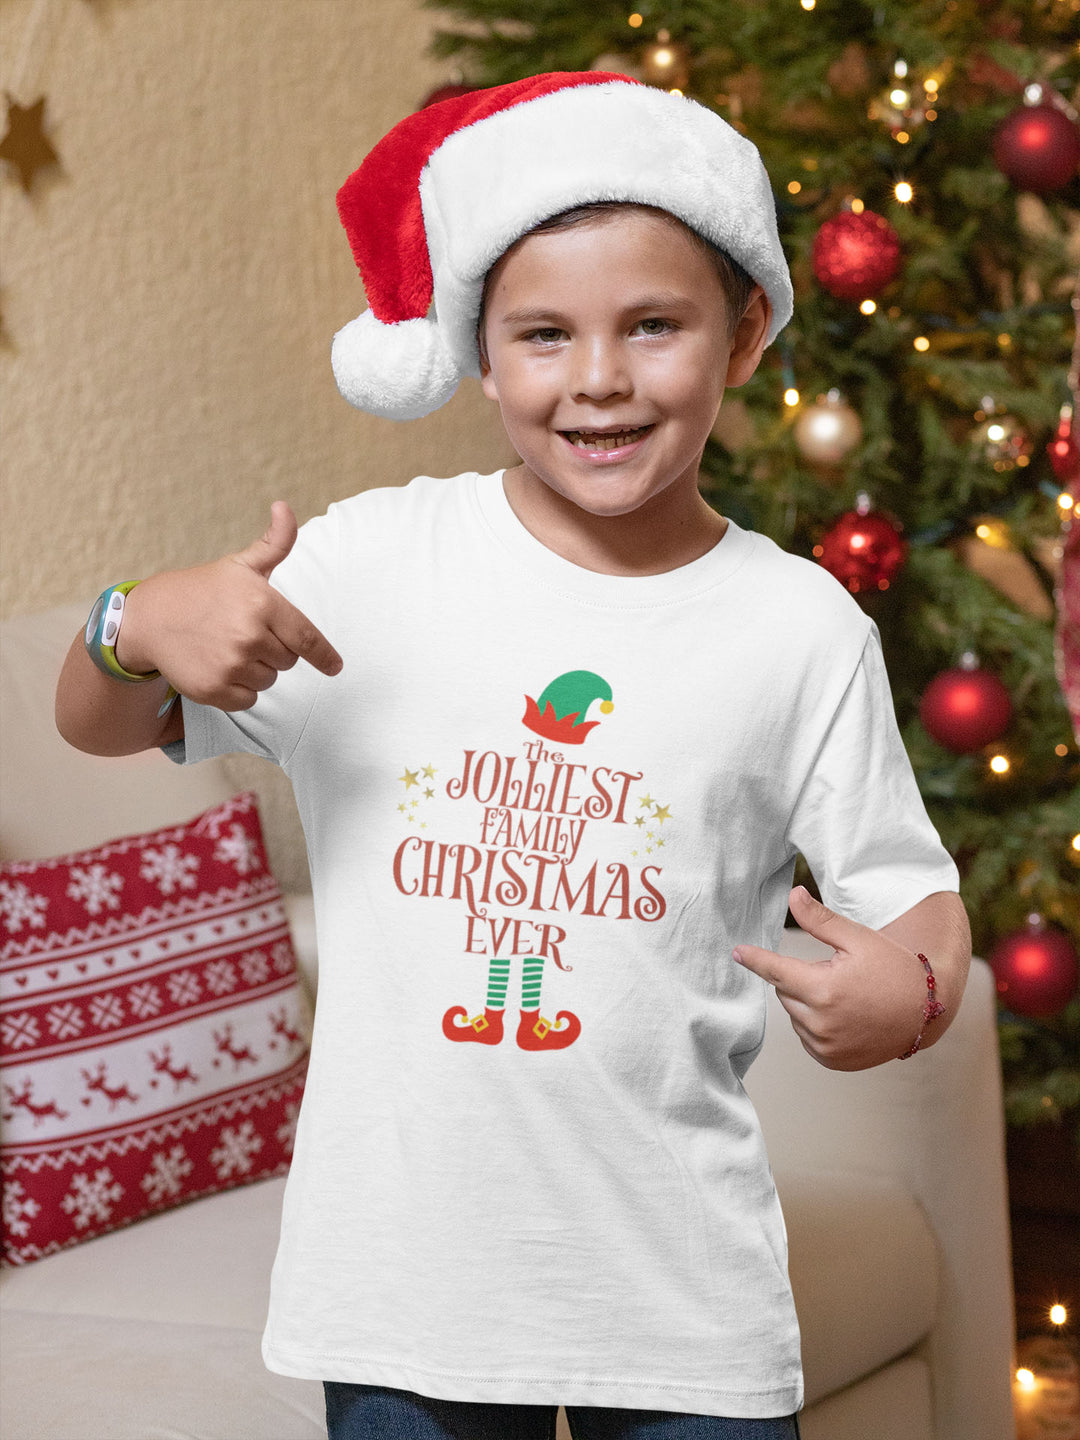 The Jolliest Family Christmas Ever. Short Sleeve T Shirts For Toddlers And Kids. - TeesForToddlersandKids -  t-shirt - christmas, holidays - the-jolliest-family-christmas-ever-short-sleeve-t-shirts-for-toddlers-and-kids